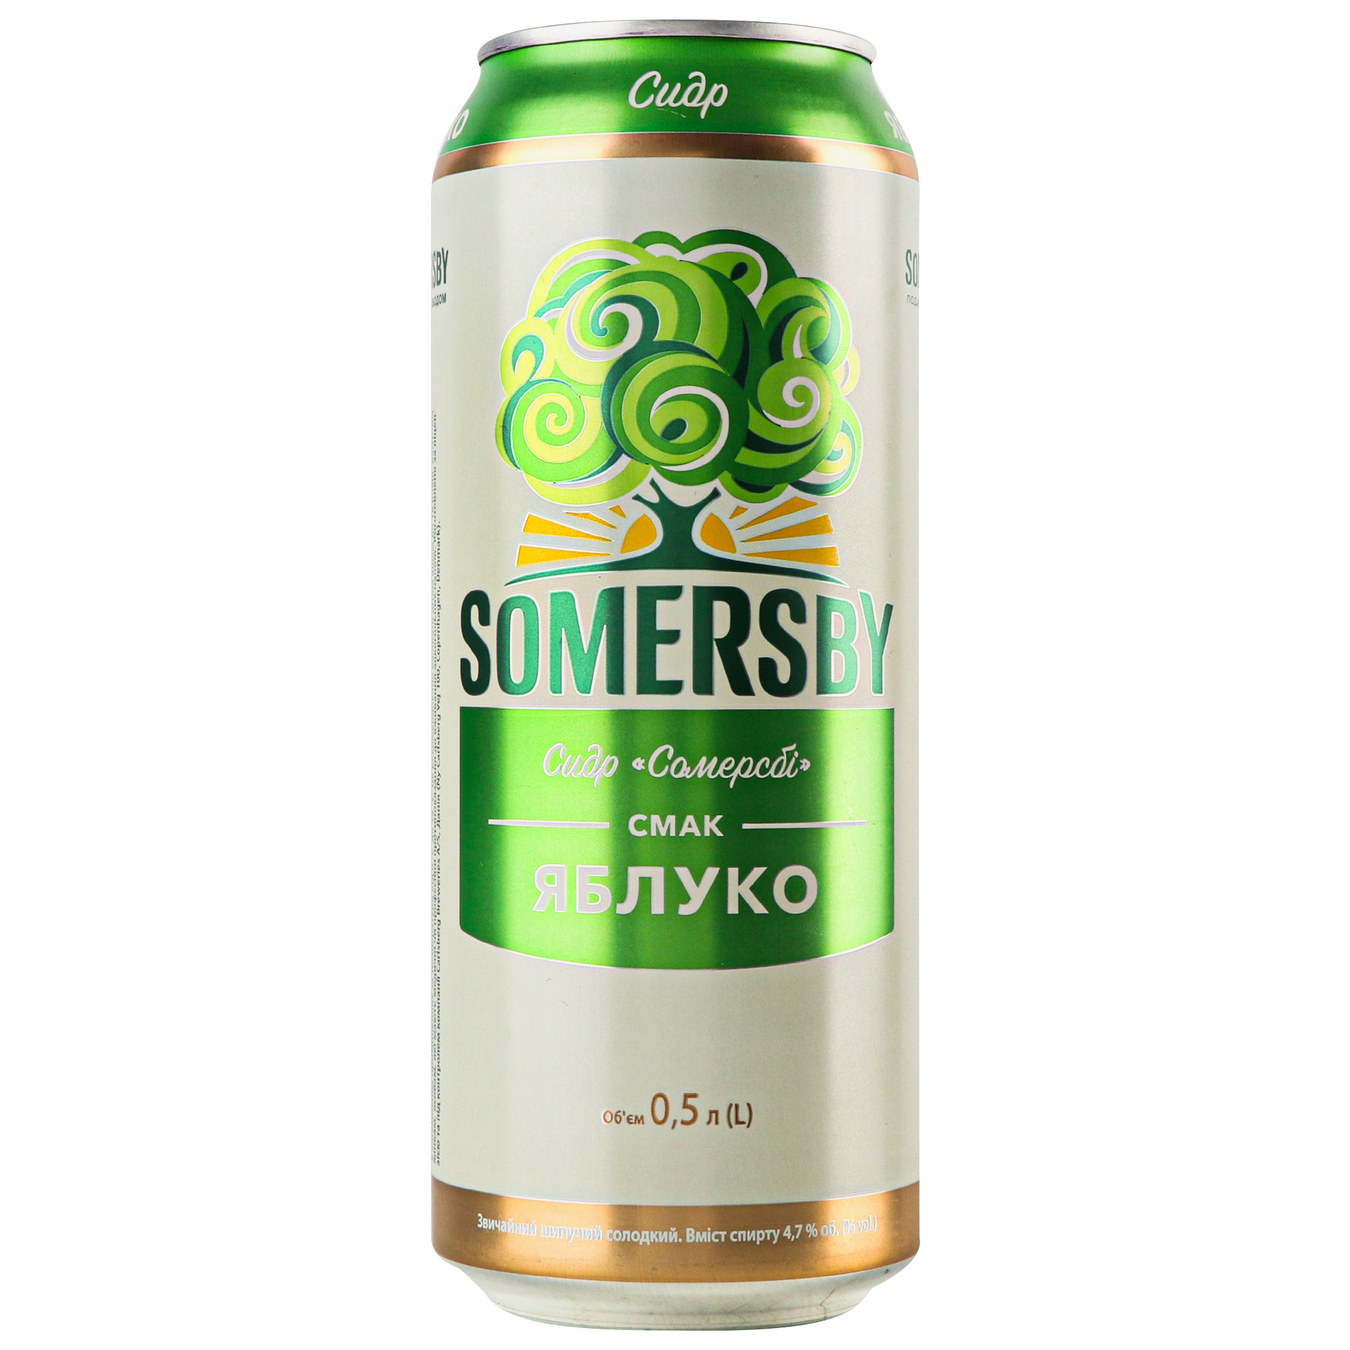 Cider Somersby sweet iron can 0.5 l